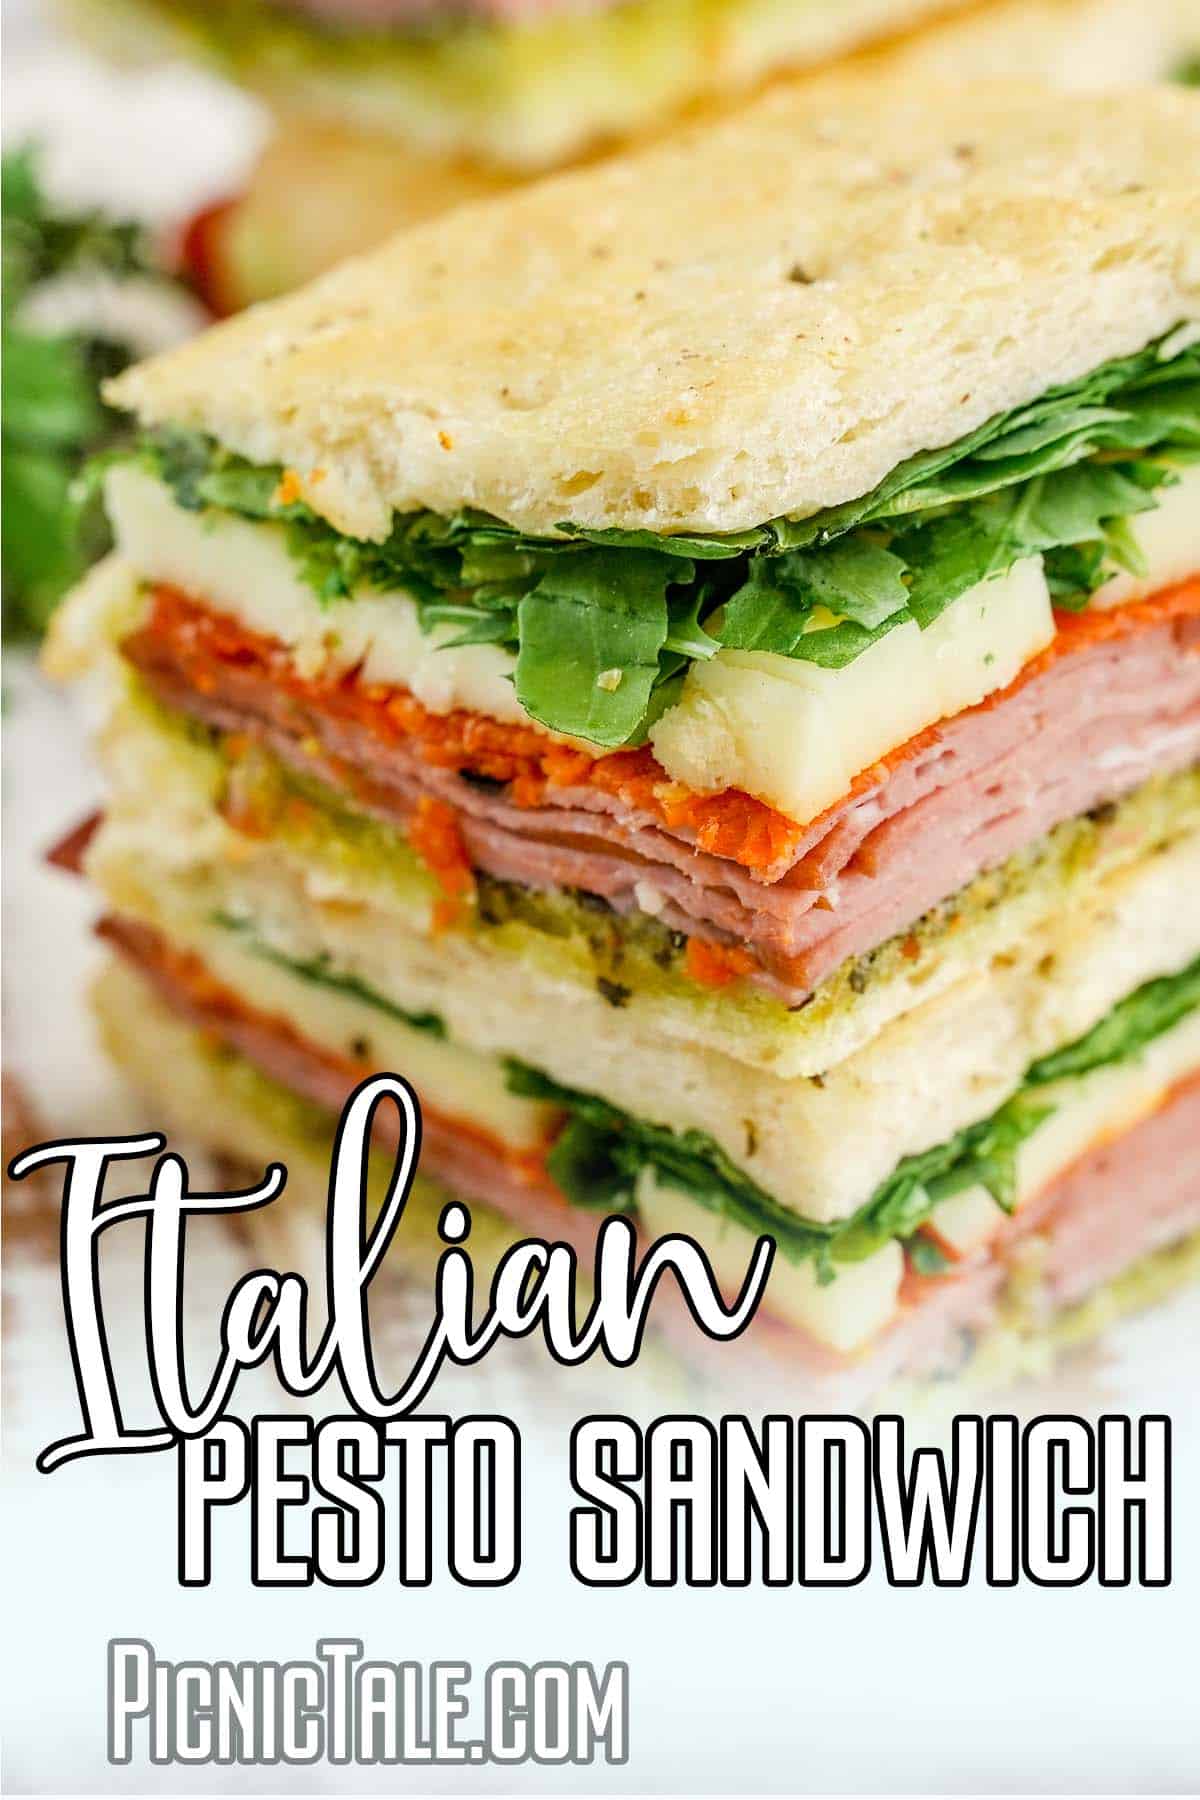 Close up of Italian Pesto Sandwich, with lettering on bottom.